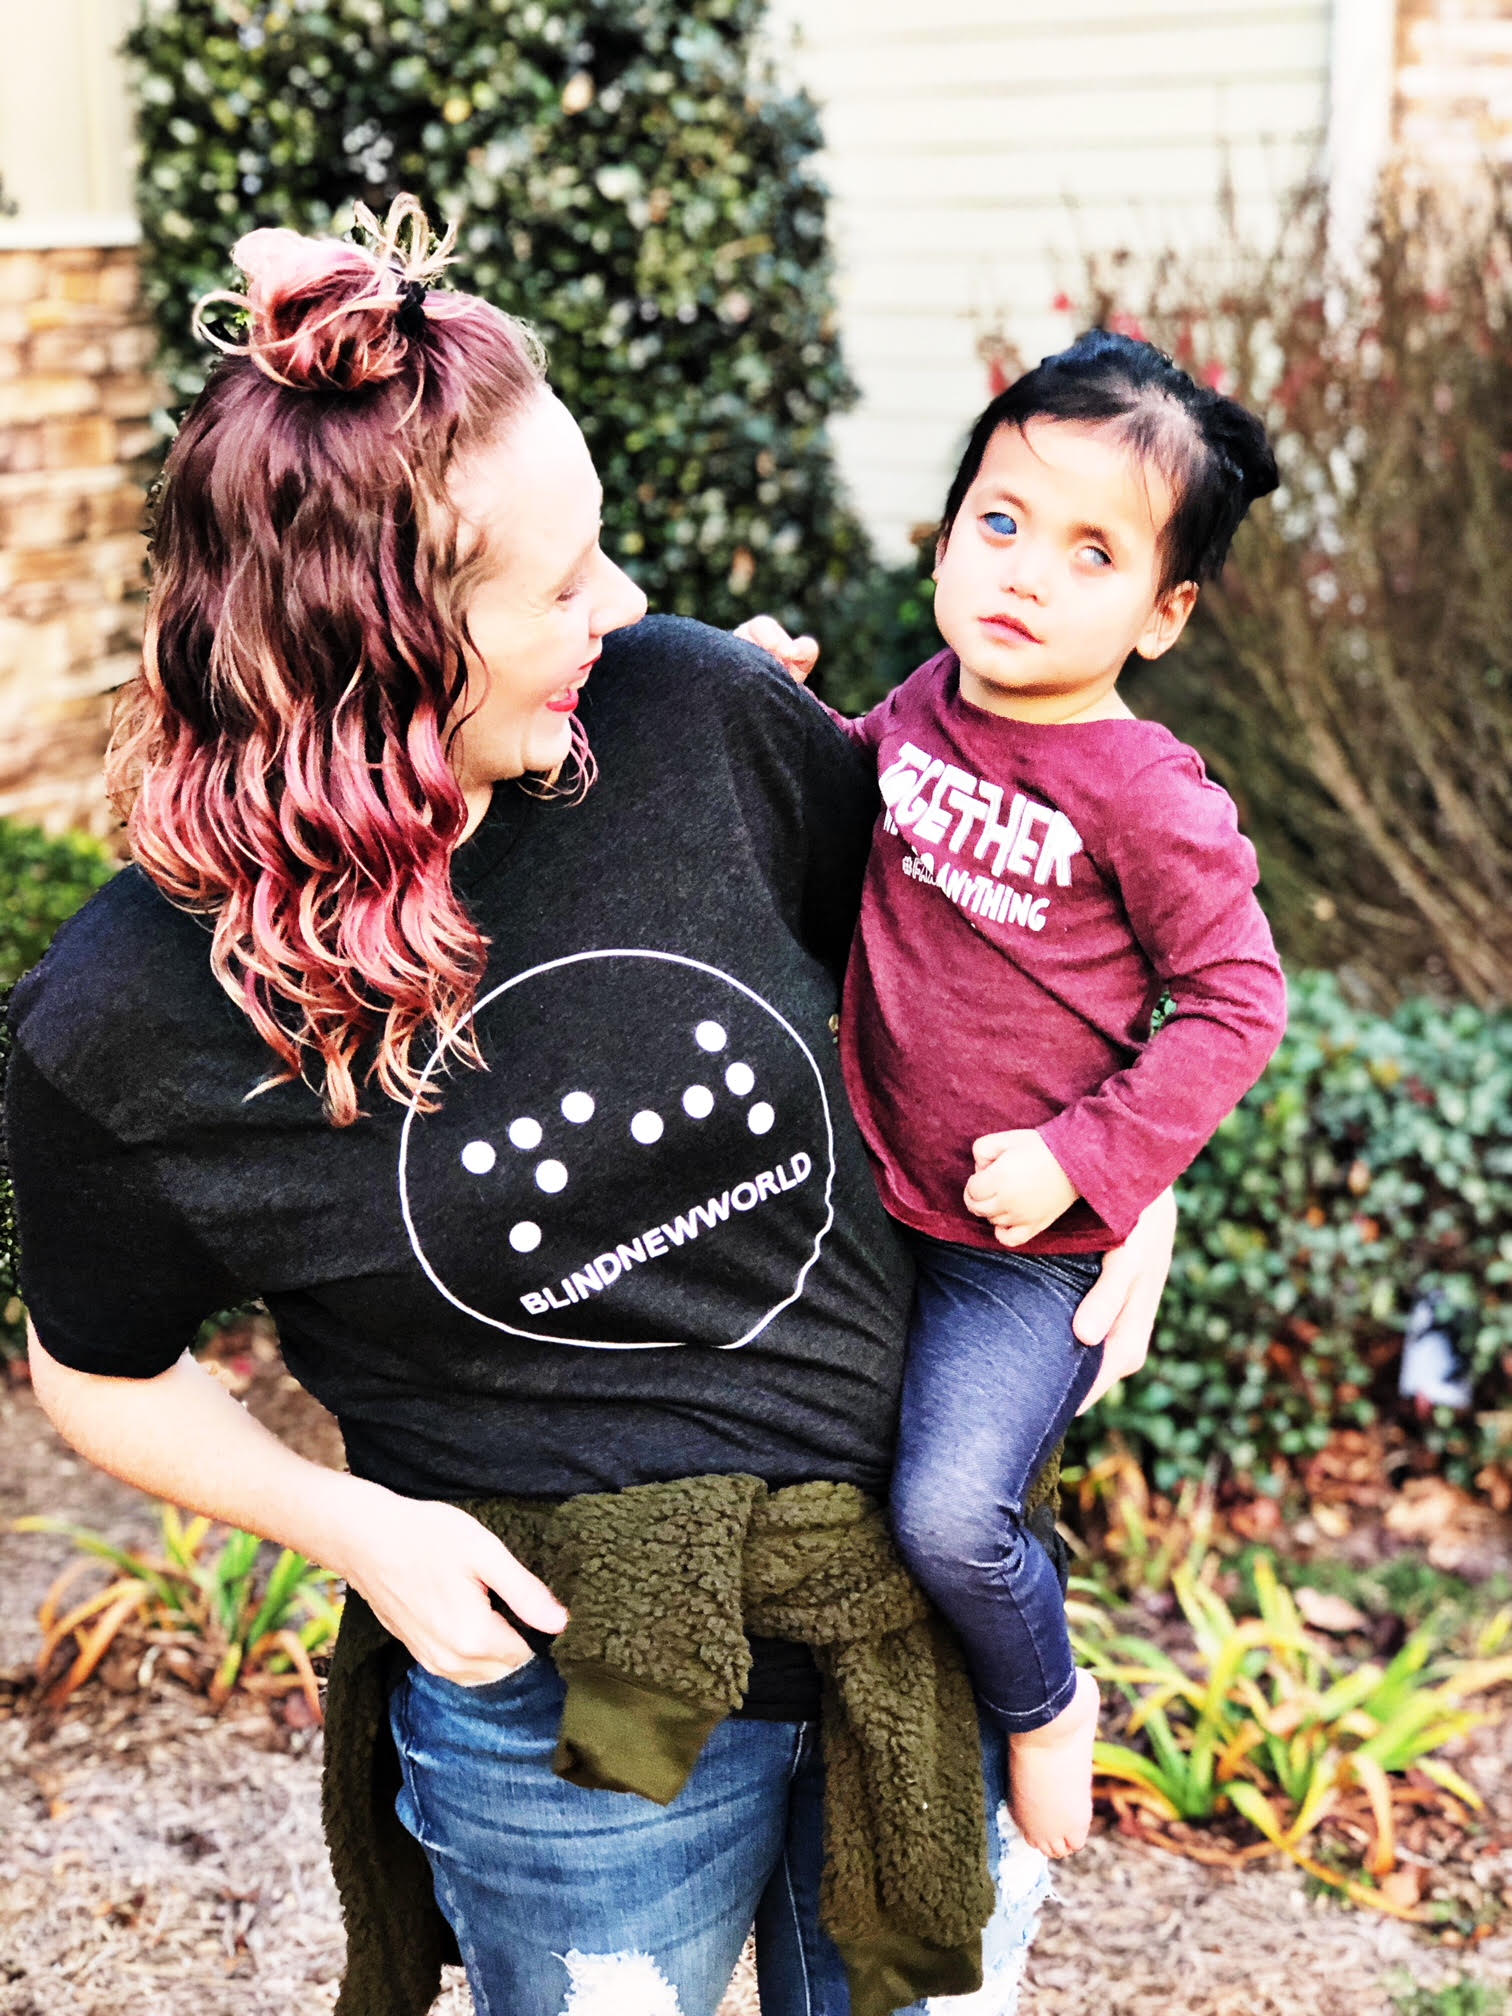 Eryn Austin, wearing a BlindNewWorld t-shirt, holds Primrose on her hip - facing her and smiling. Primrose is facing the camera and smiling.